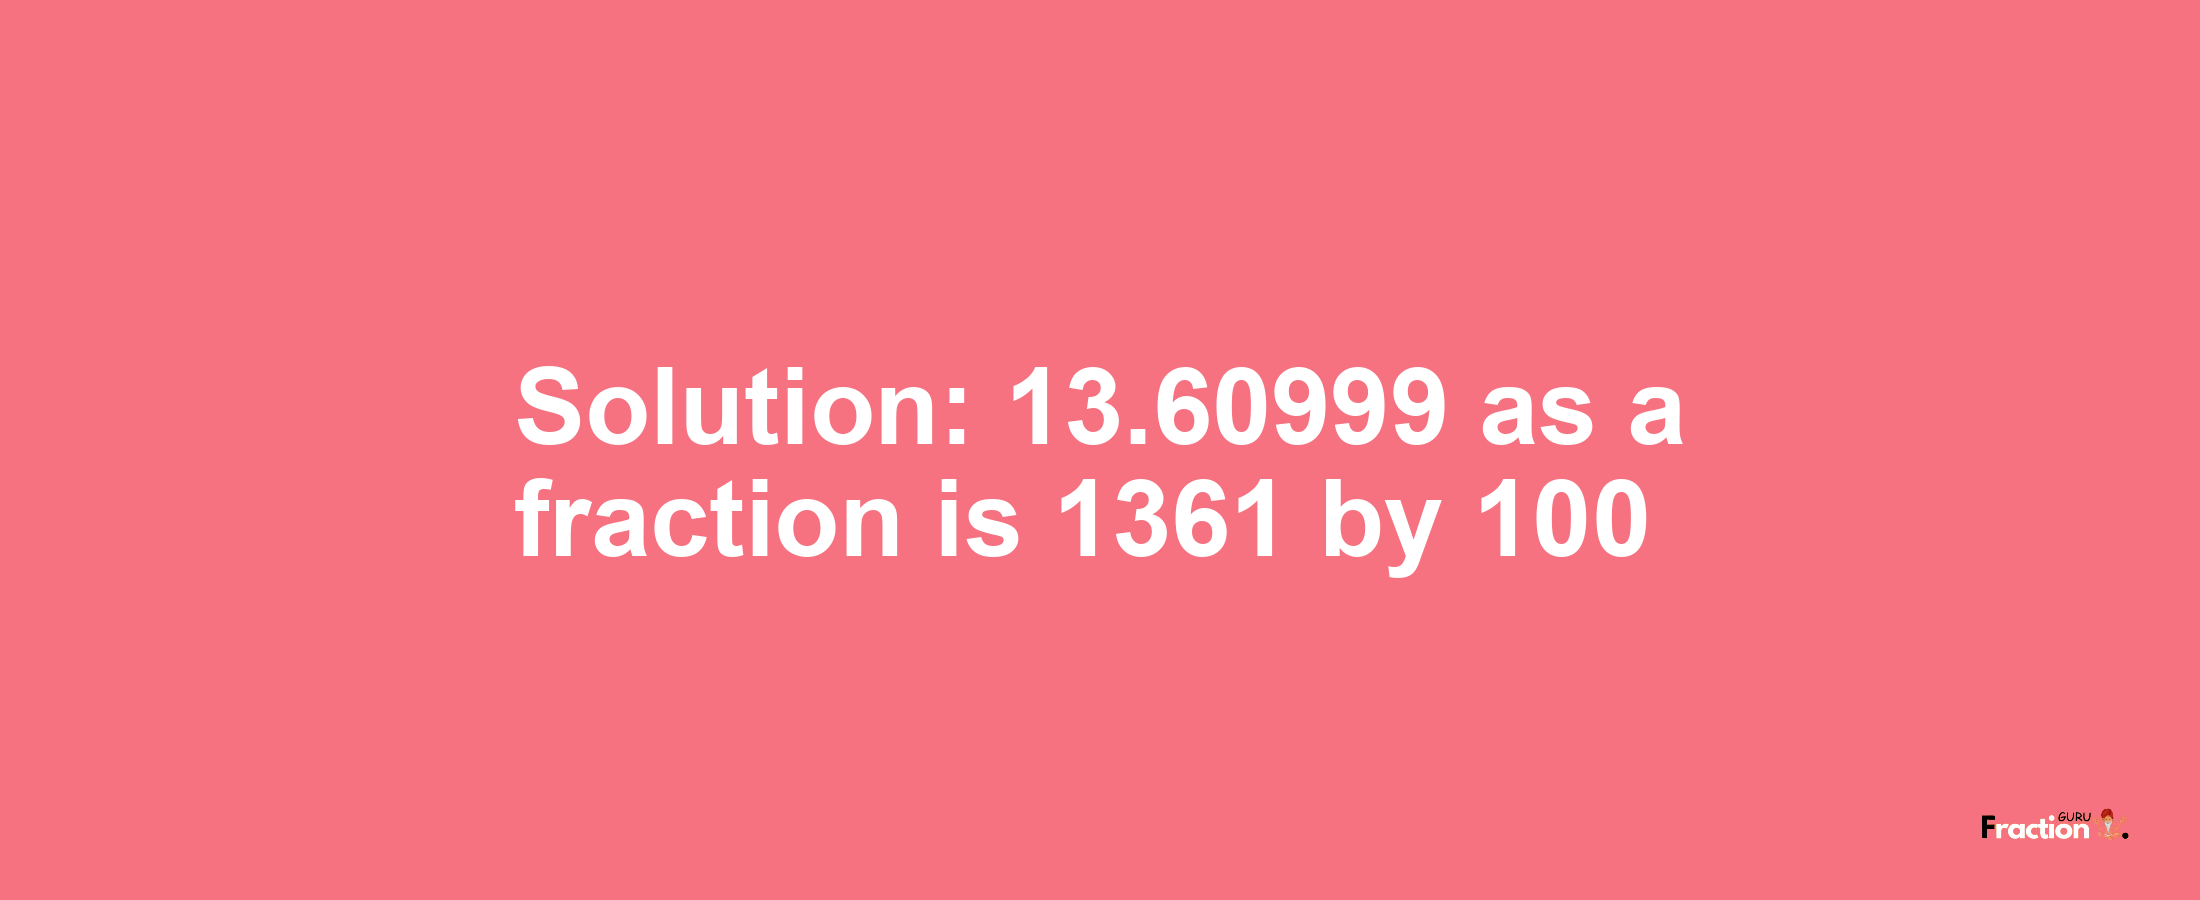 Solution:13.60999 as a fraction is 1361/100